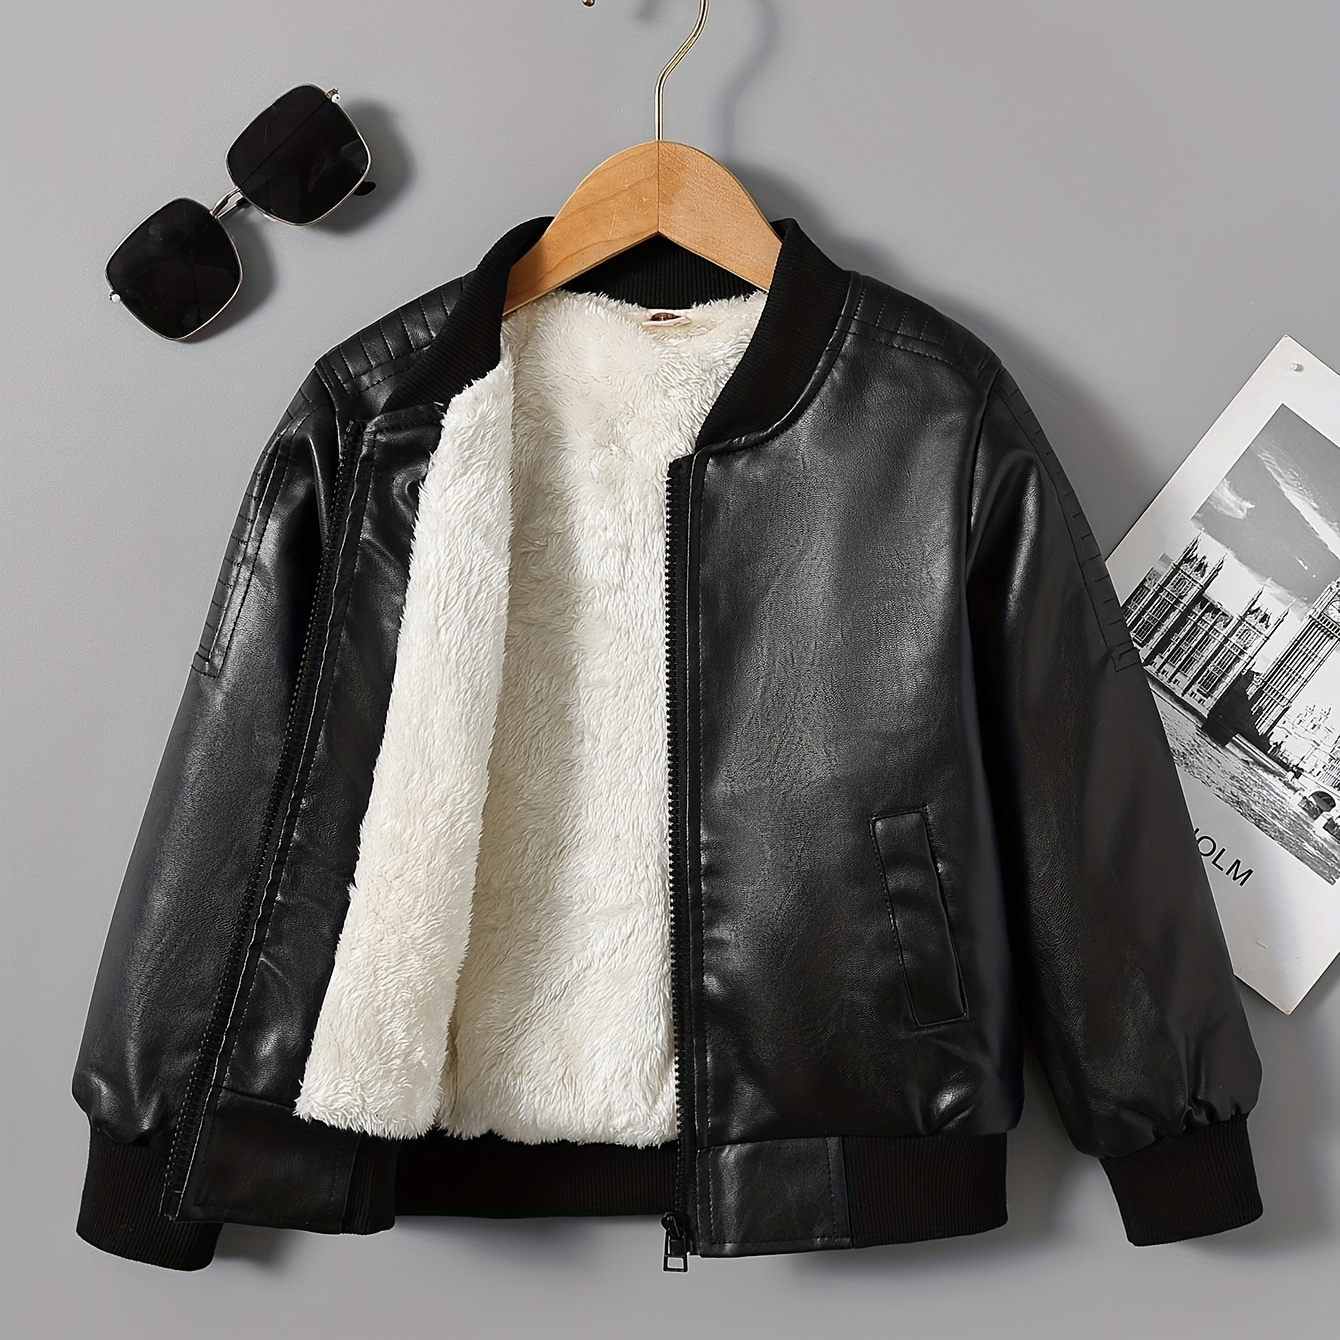 

Boys Girls Pu Leather Jacket For Winter, Fleece Lined Casual Motorcycle Jacket Coat For Outwear